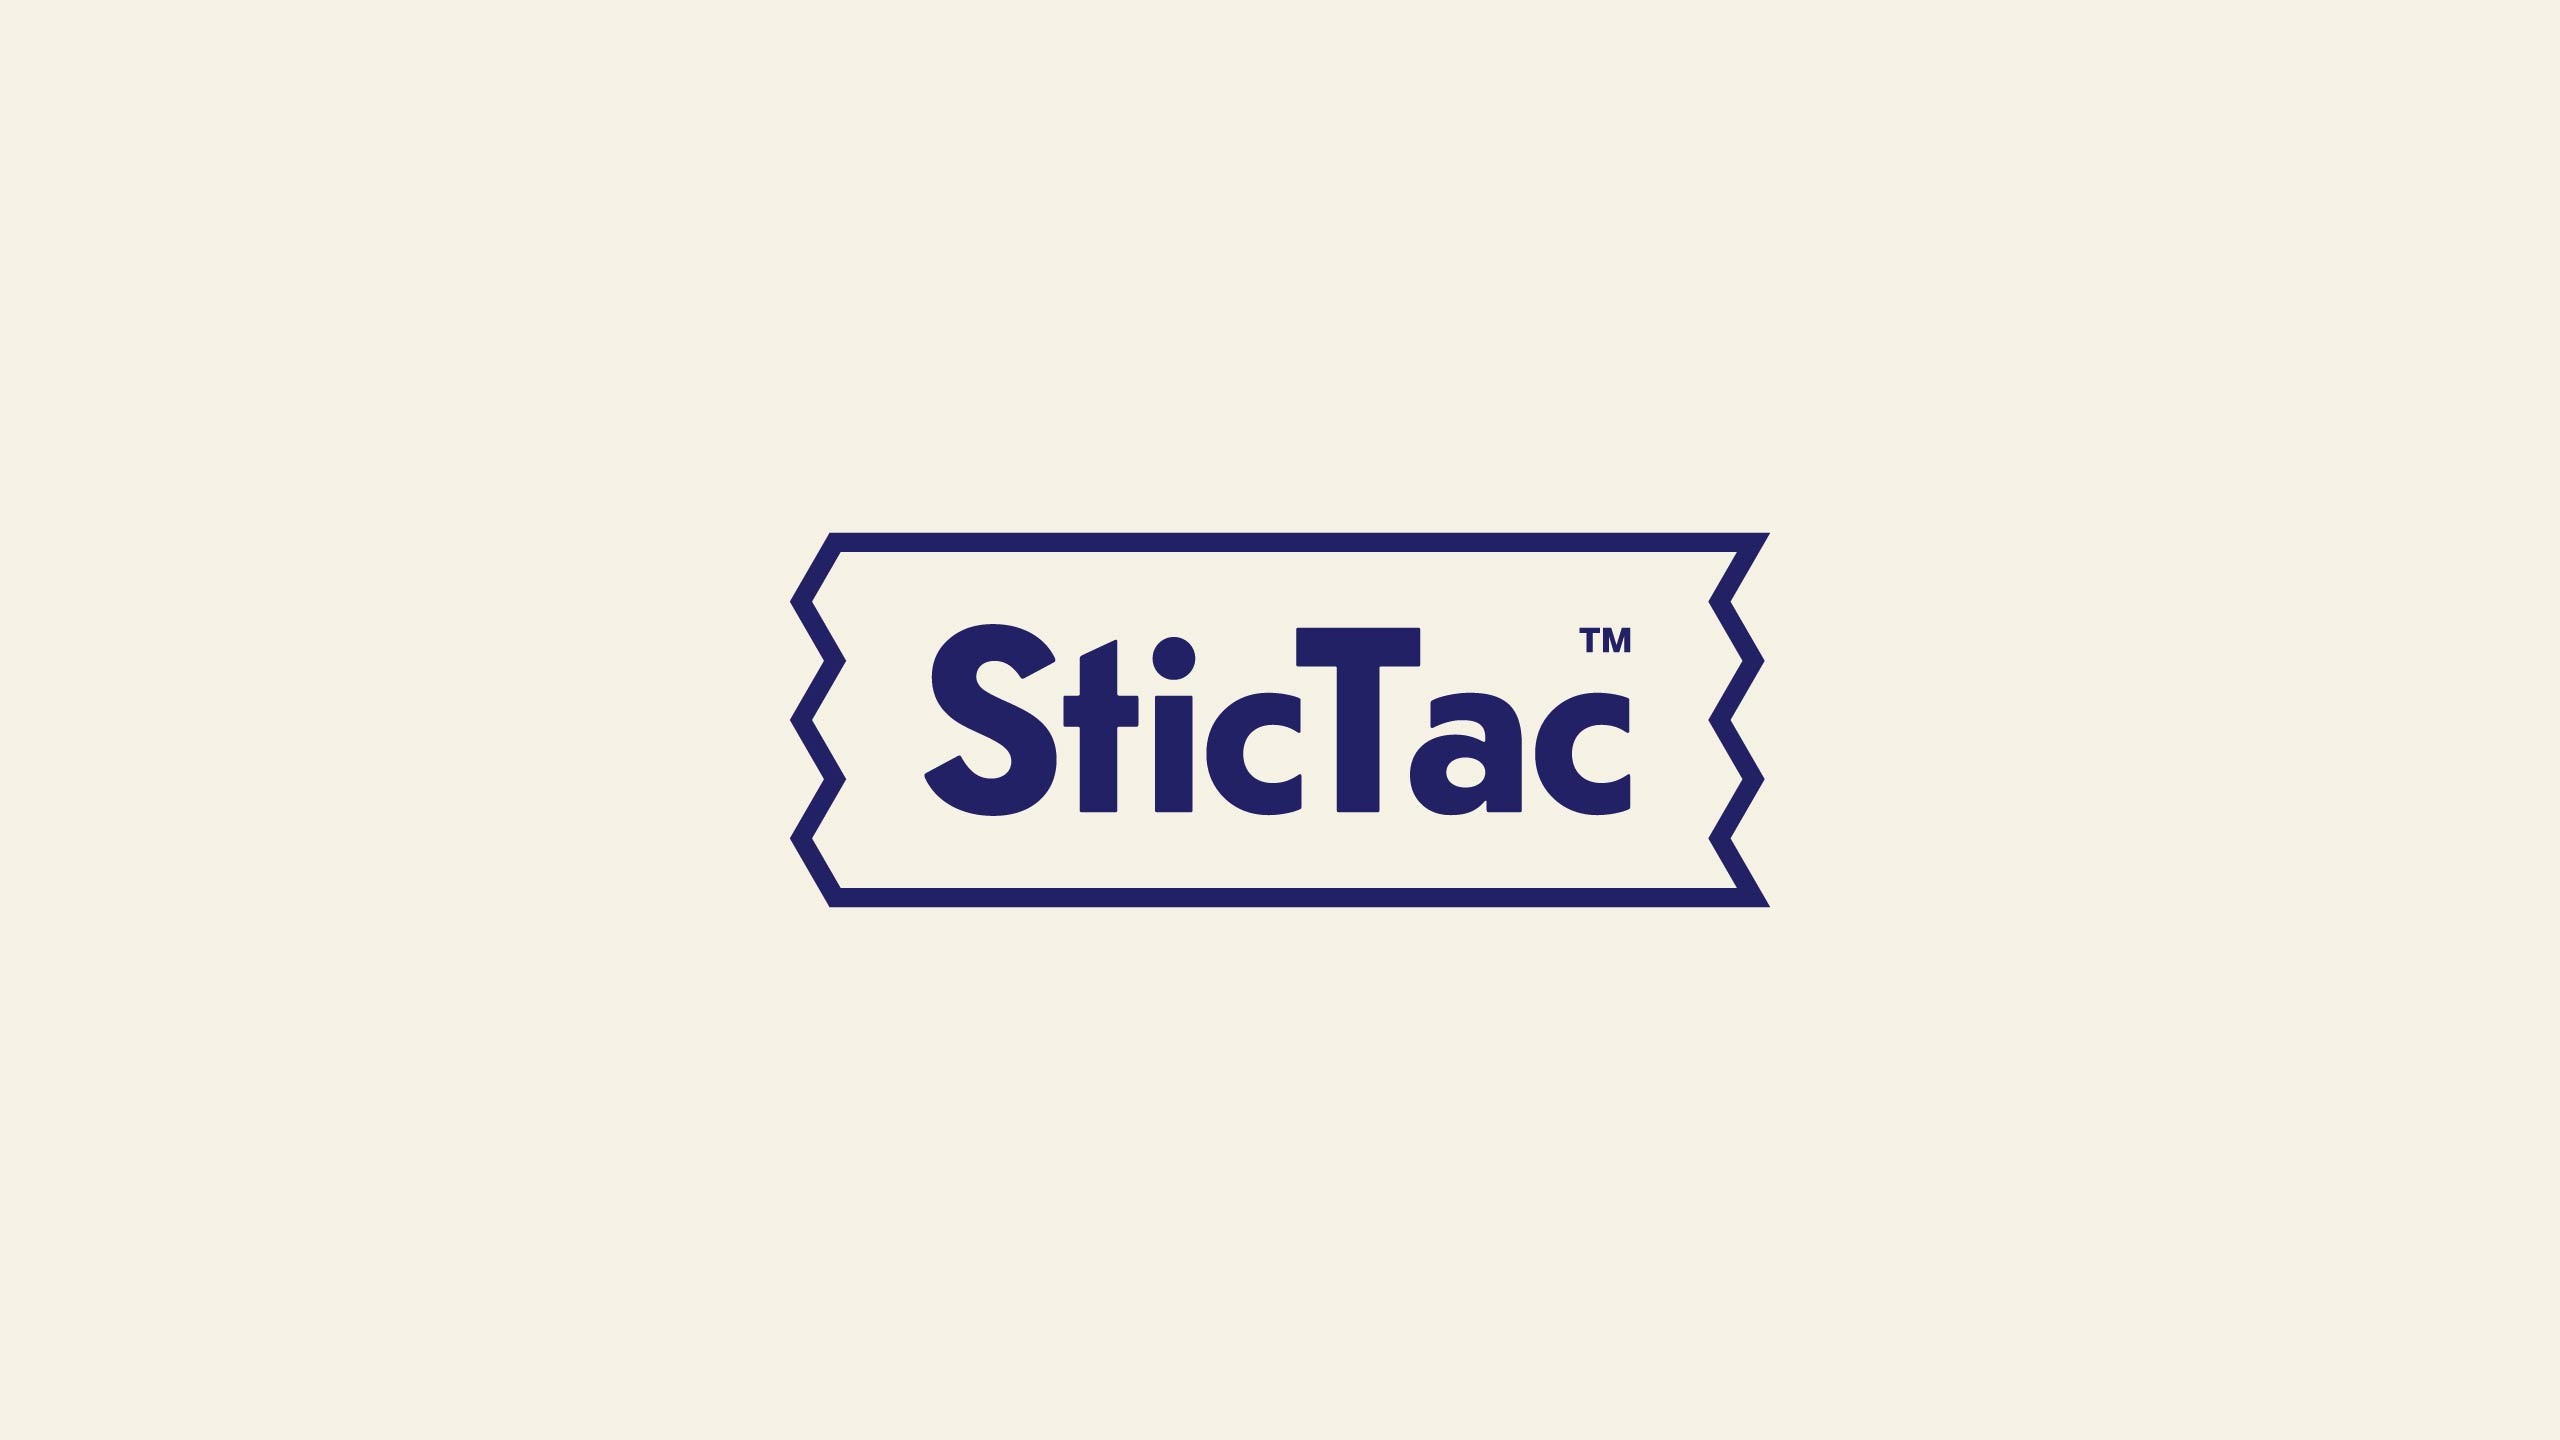 The SticTac logo uses a shape that looks like tape with torn edges